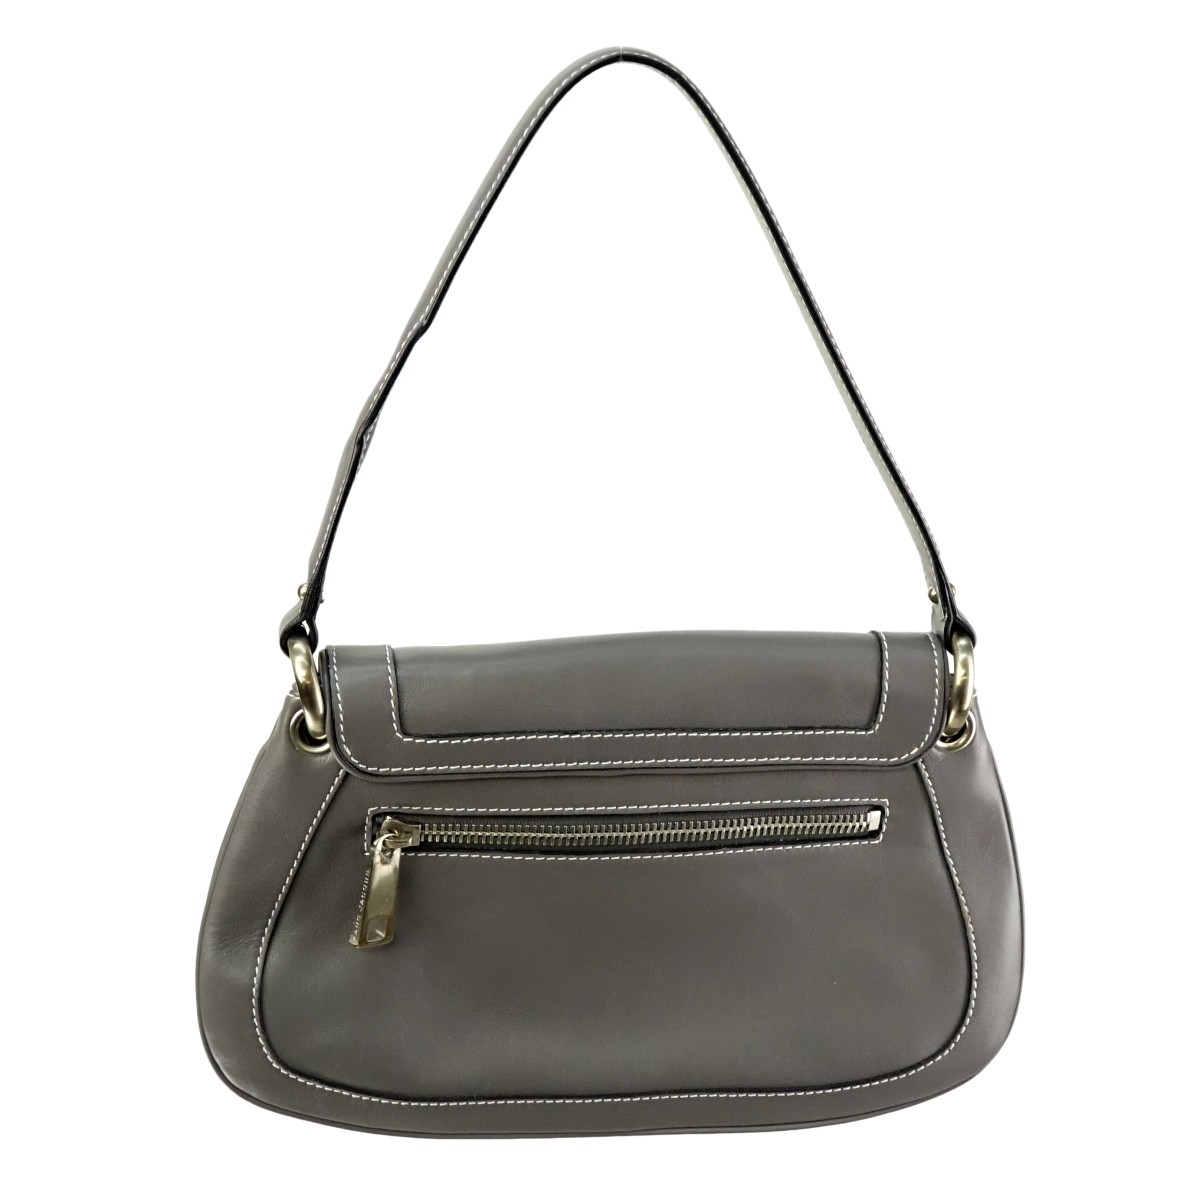 Marc Jacobs Gray Top Stitch Leather Flap Bag